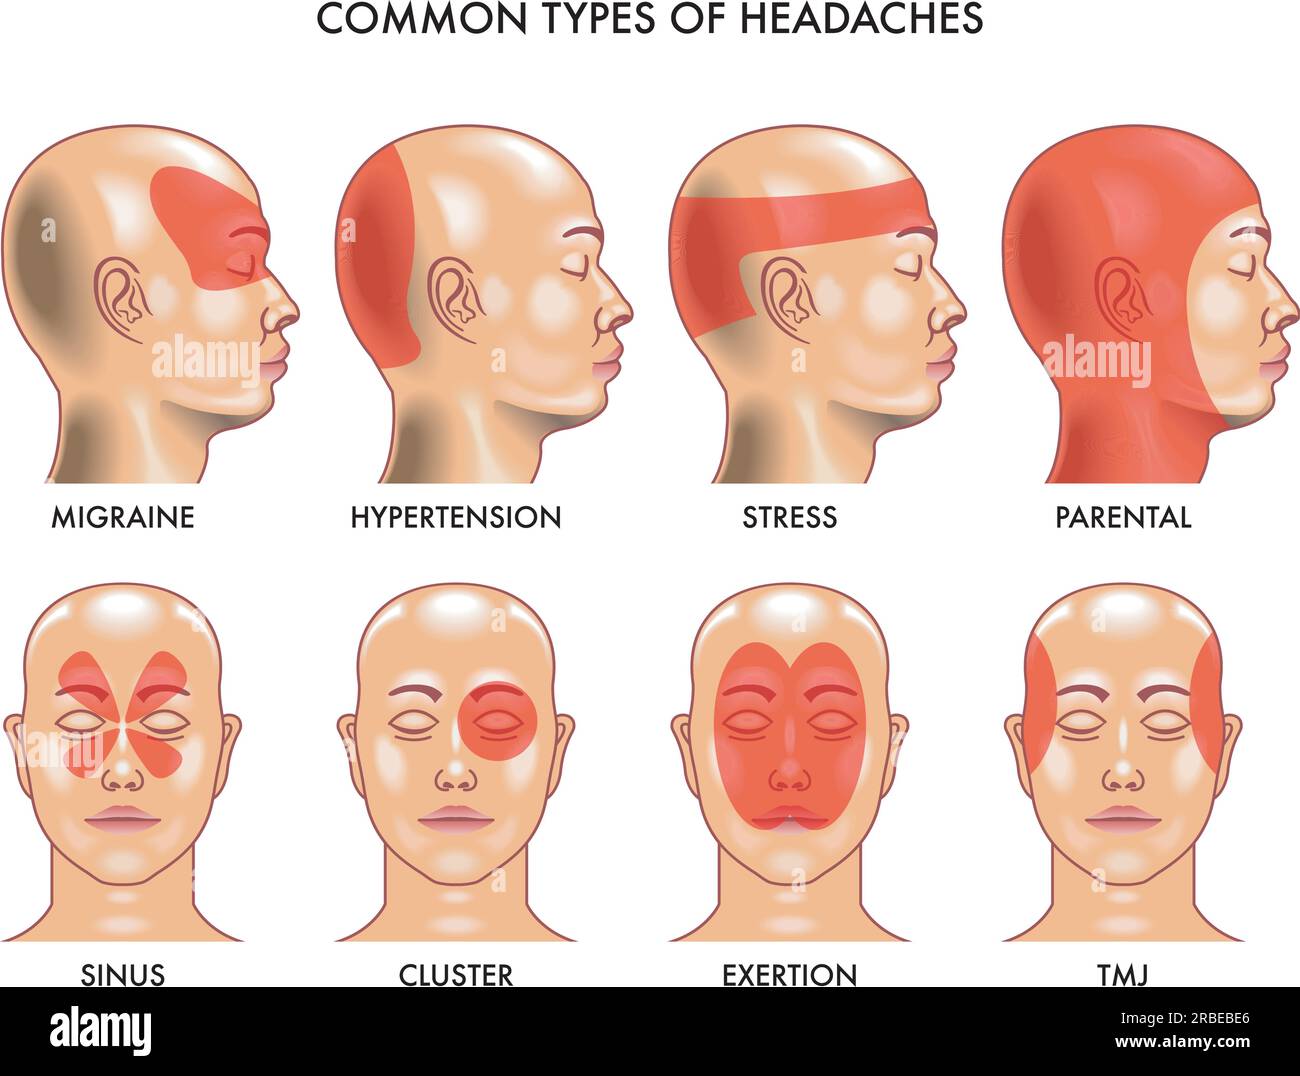 Medical Illustration of common types of headaches. Stock Vector